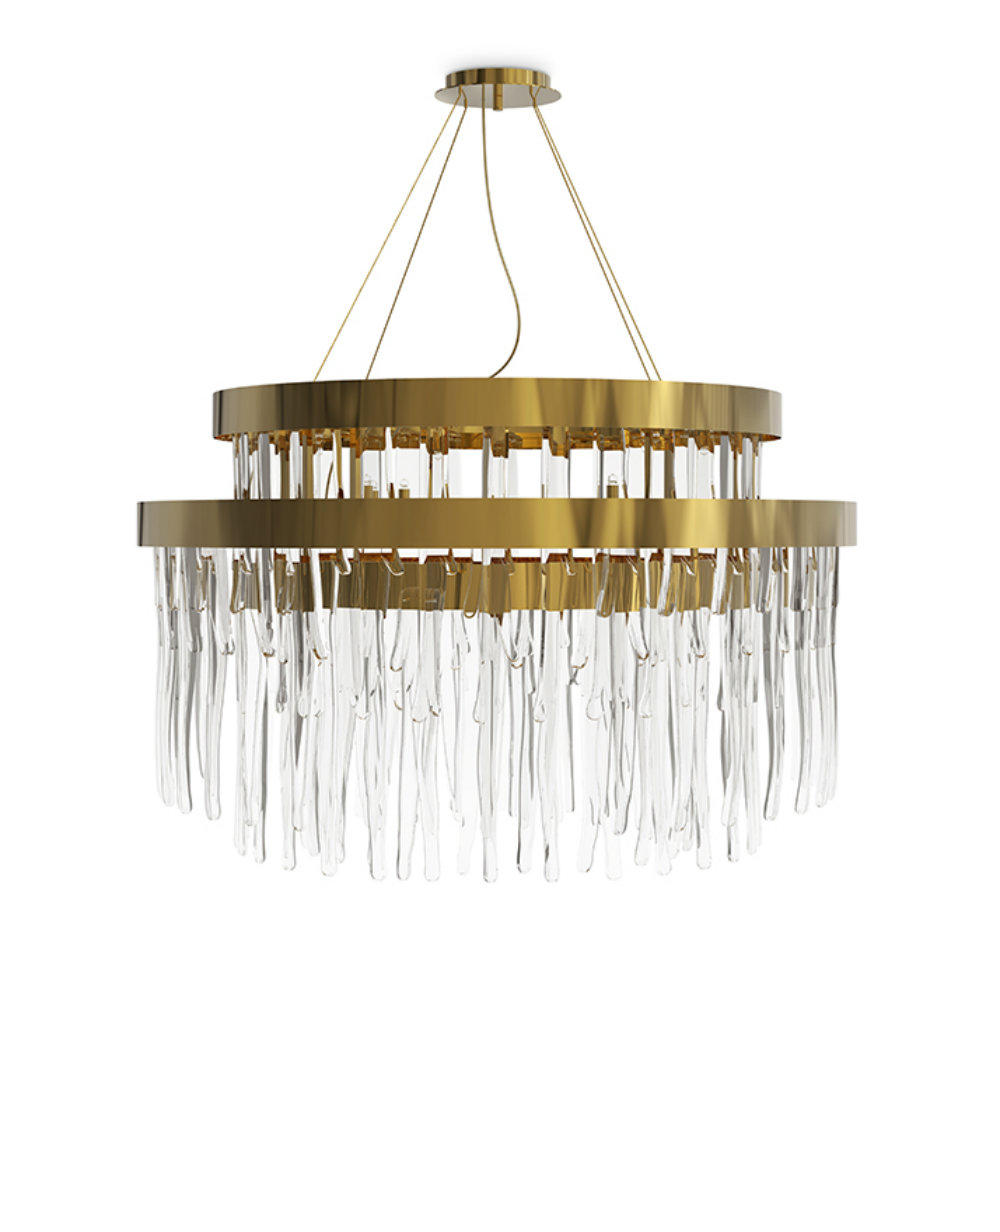 Lighting Inspiration: Meet The Babel Collection